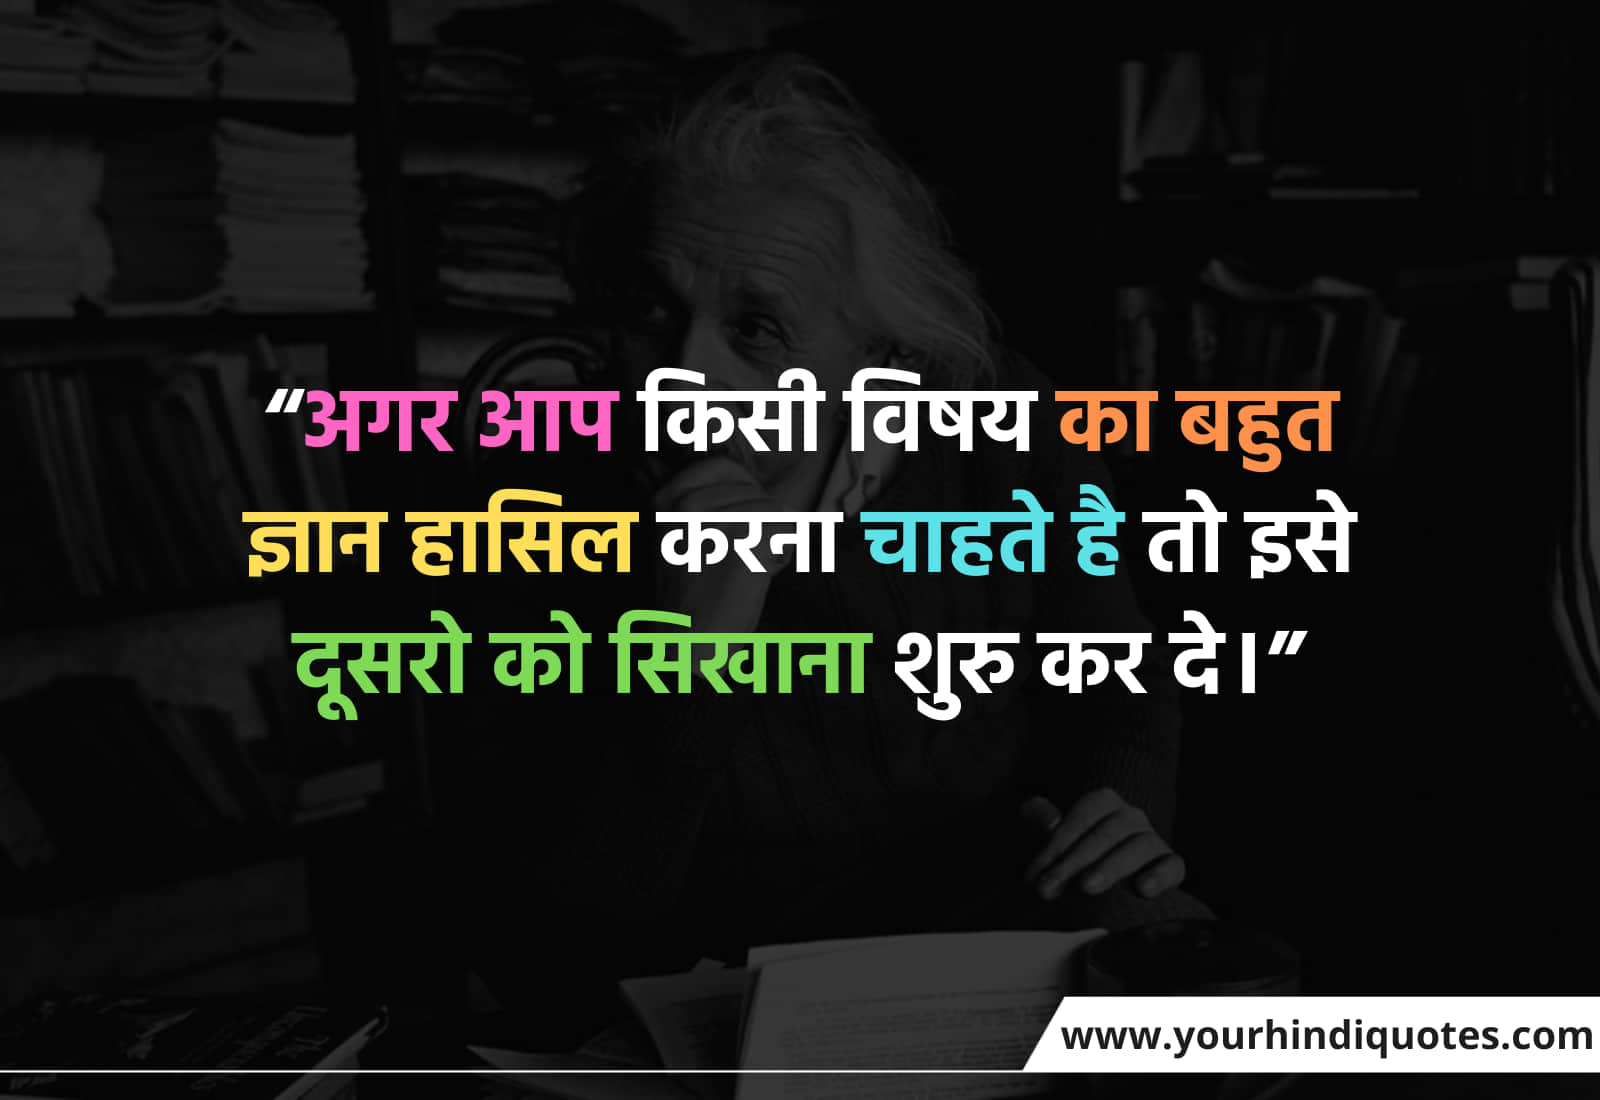 Motivational Students Quotes In Hindi